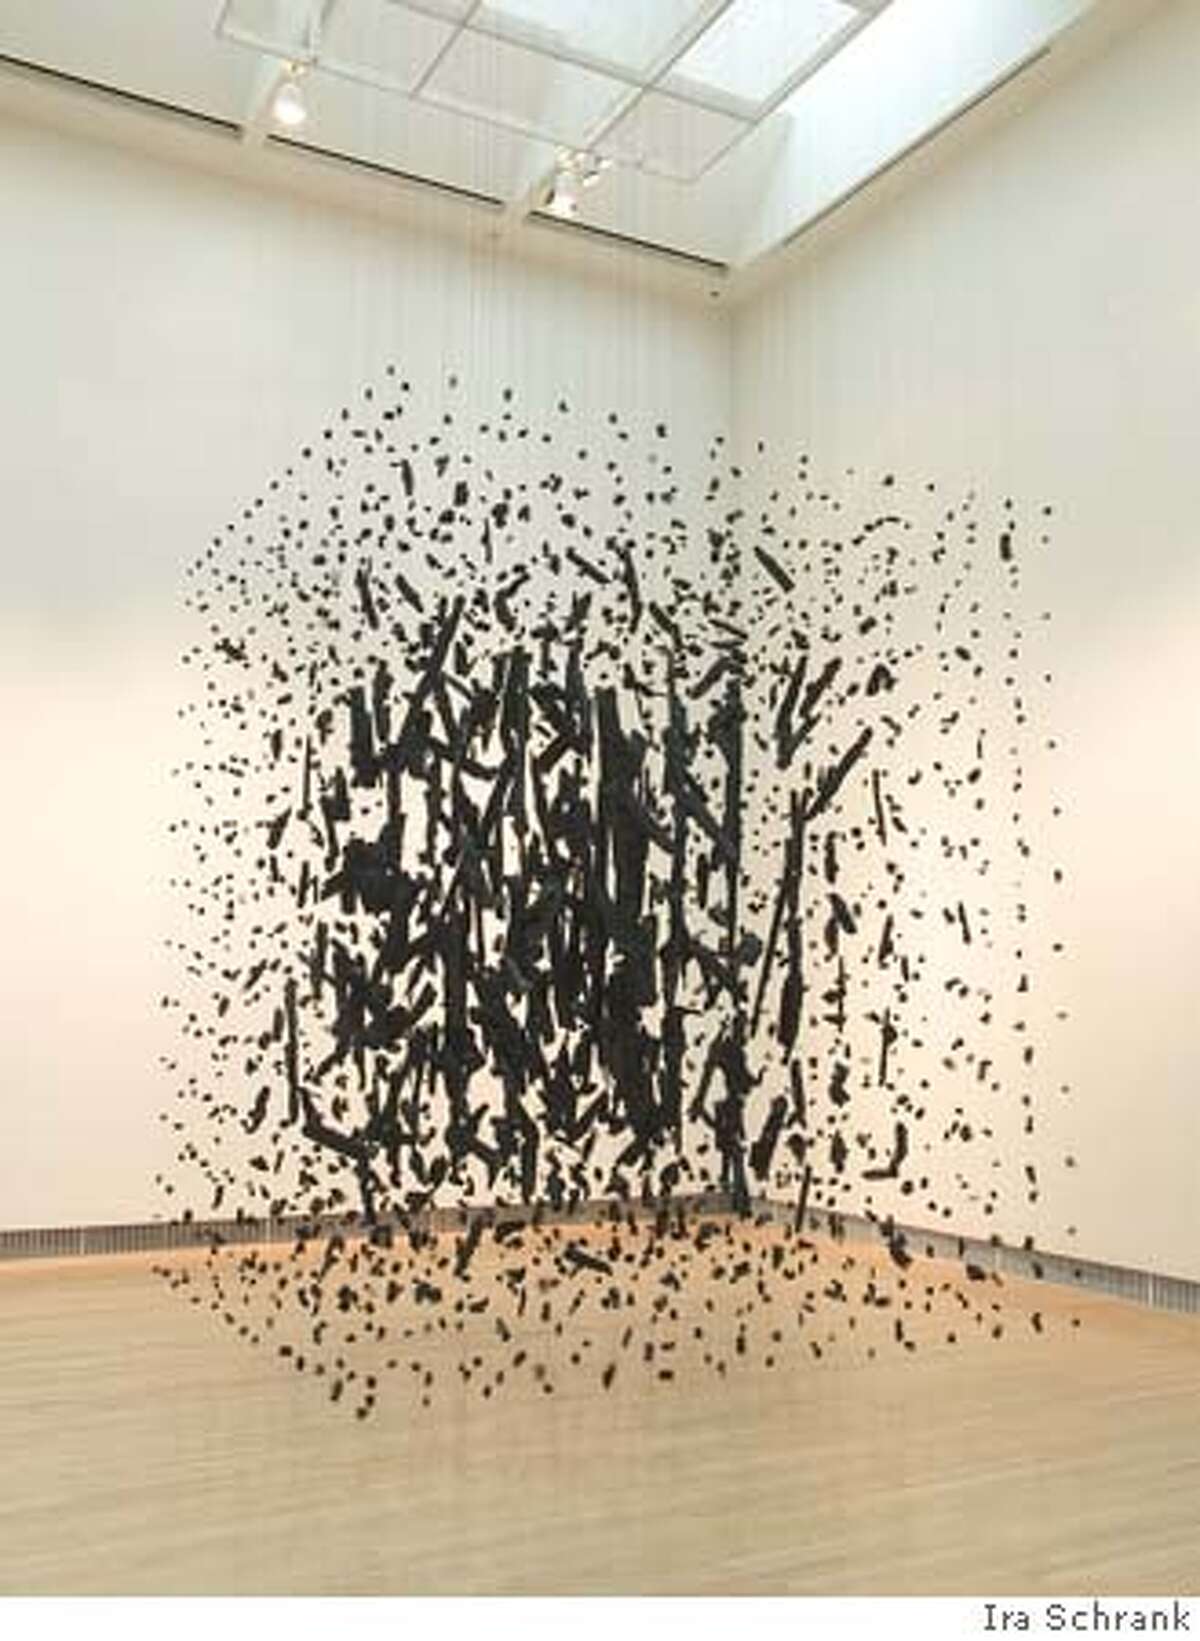 Cornelia Parker, Mass, 1997. Wire, string, burnt wood retrieved from the Baptist Church of Lytle, Texas (struck by lightning) Collection of the Phoenix Art Museum, museum purchase with funds provided by Dr. and Mrs. Howard J. Hendler. Photo by Ira Schrank